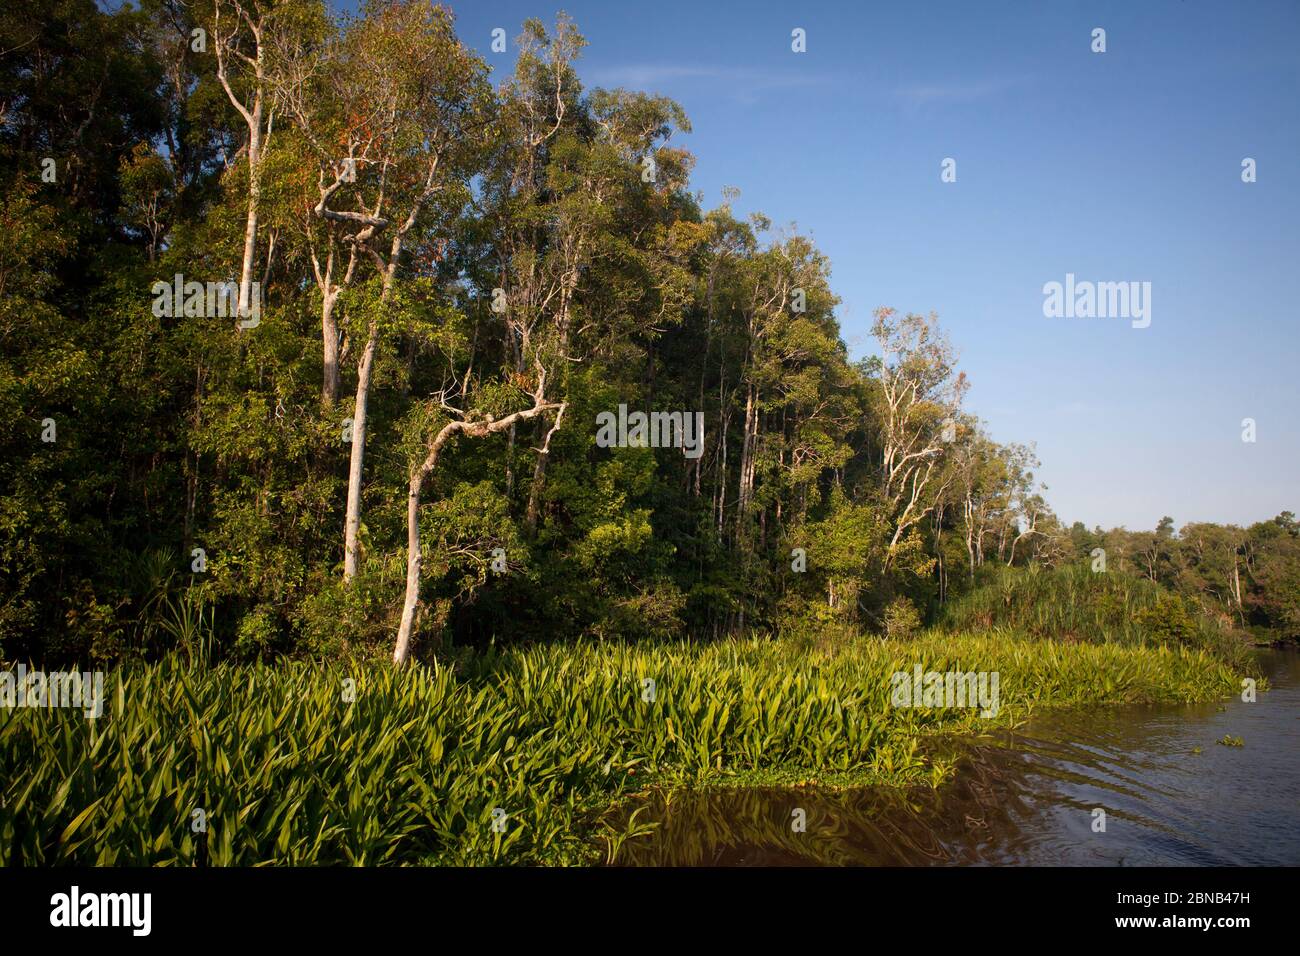 Horizontal view of the Sekonyer River bank, Tanjung Puting National Park, Central Kalimantan, Borneo, Indonesia Stock Photo